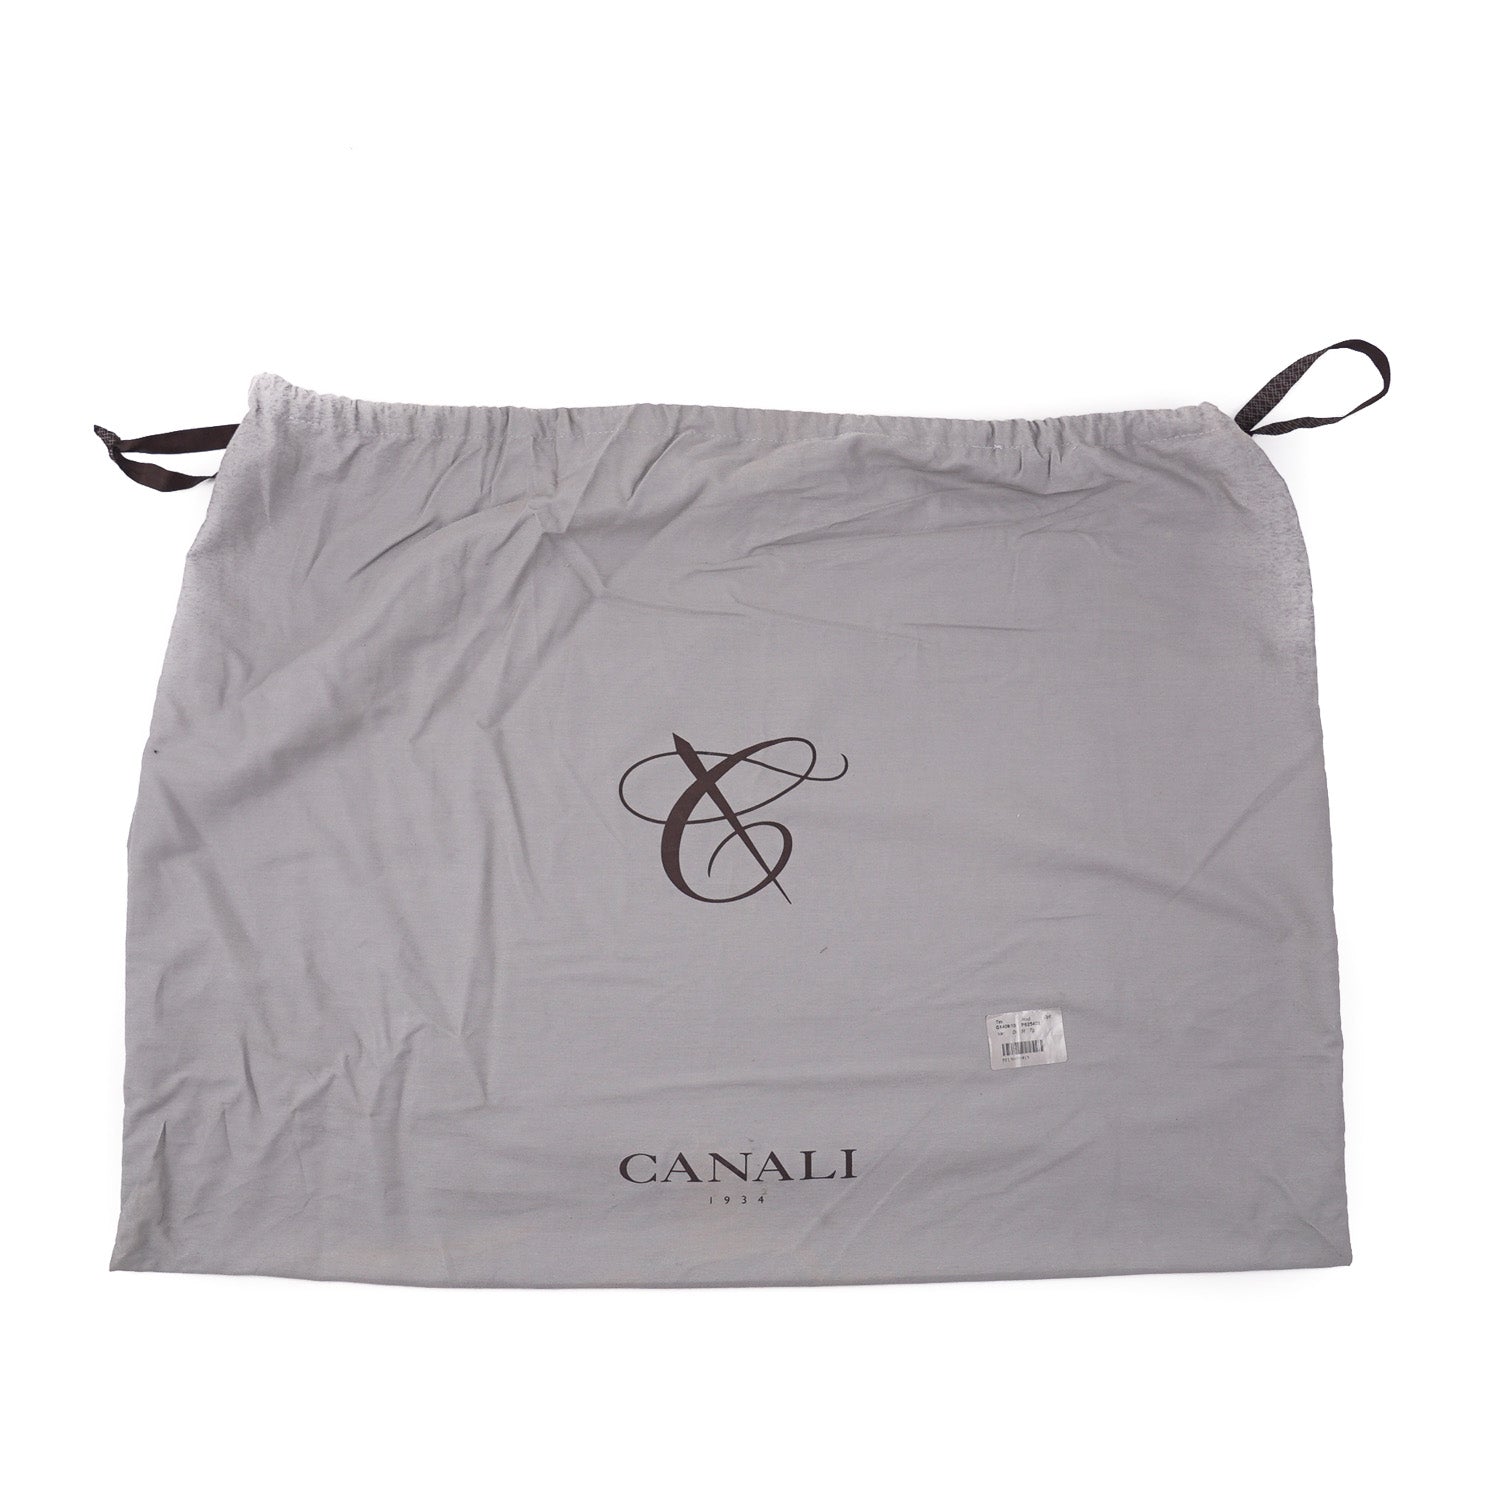 Canali Carry-On Roller Suitcase - Top Shelf Apparel